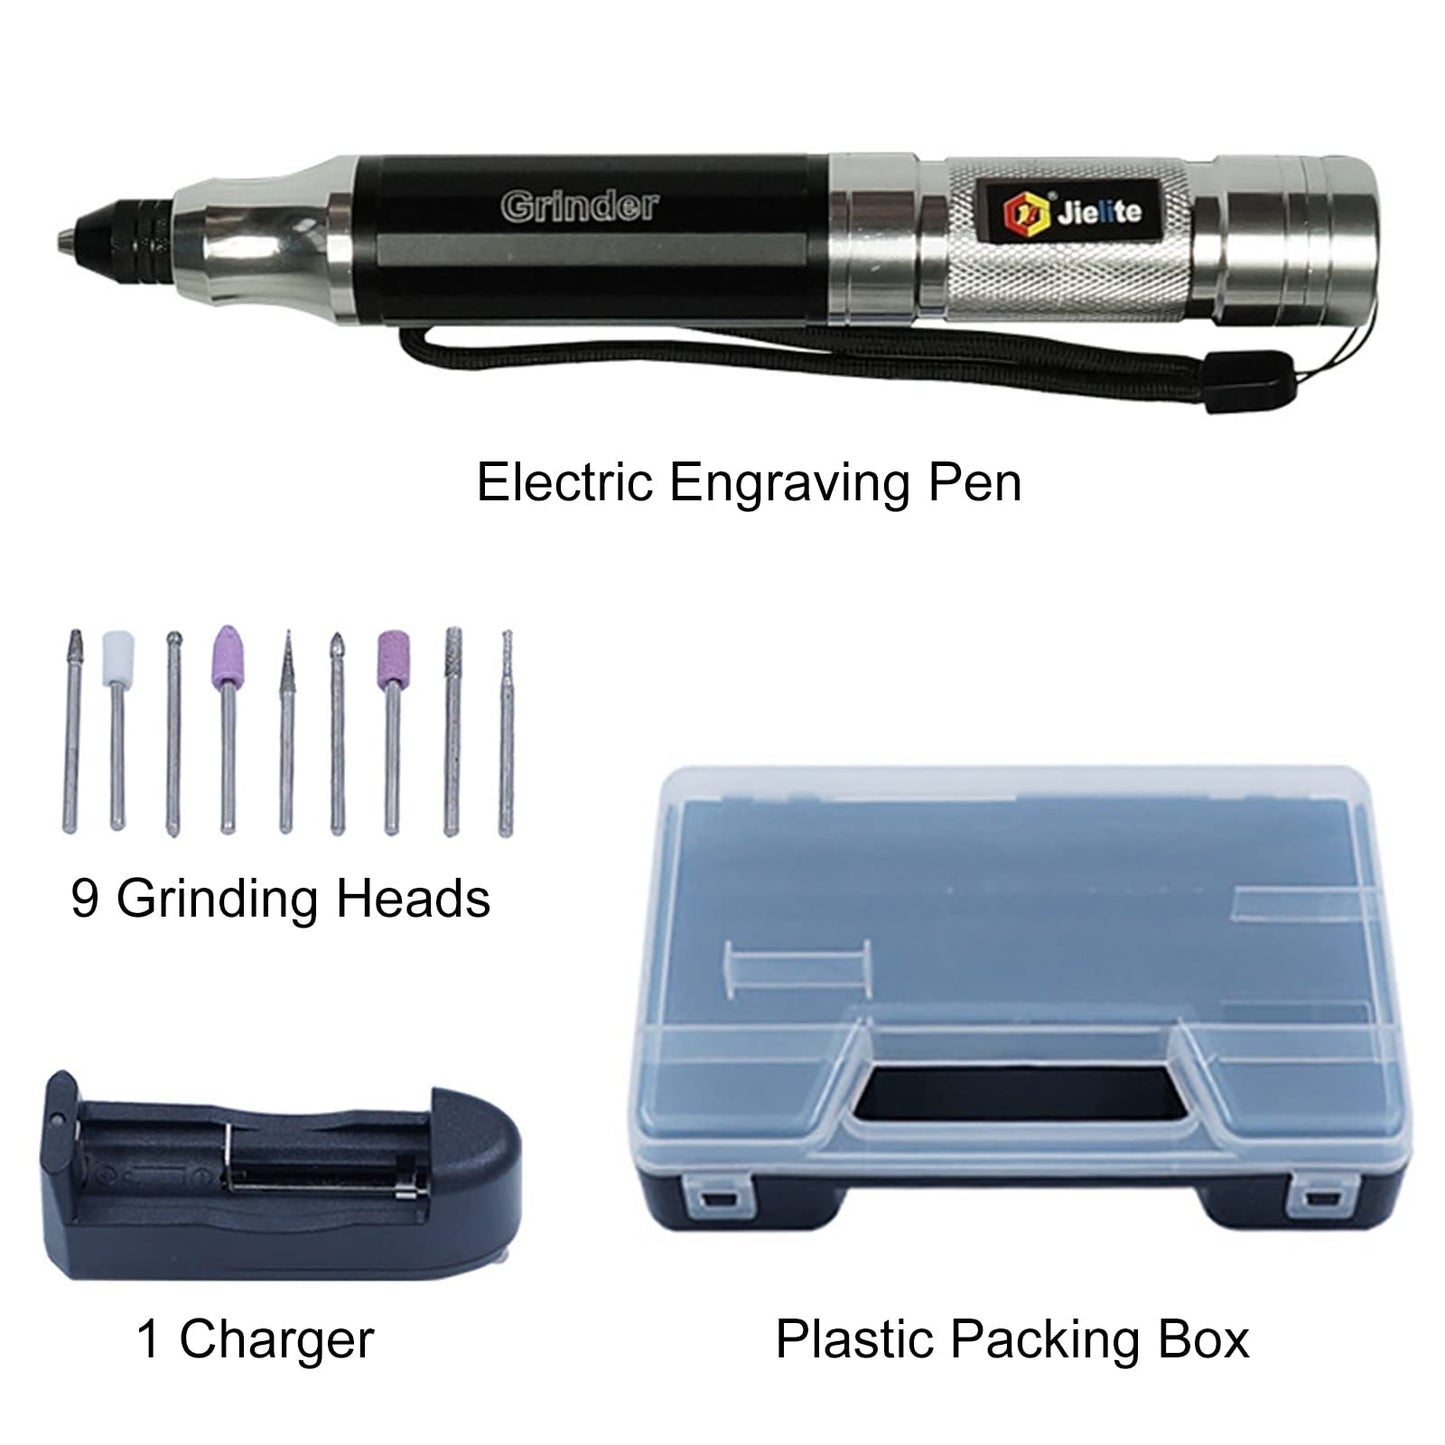 Engraving Pen Portable Electric Engraving Tool Kit, Rechargeable Engraver Machine for Metal Glass Wood Leather Jewellery Carving Drilling Lettering